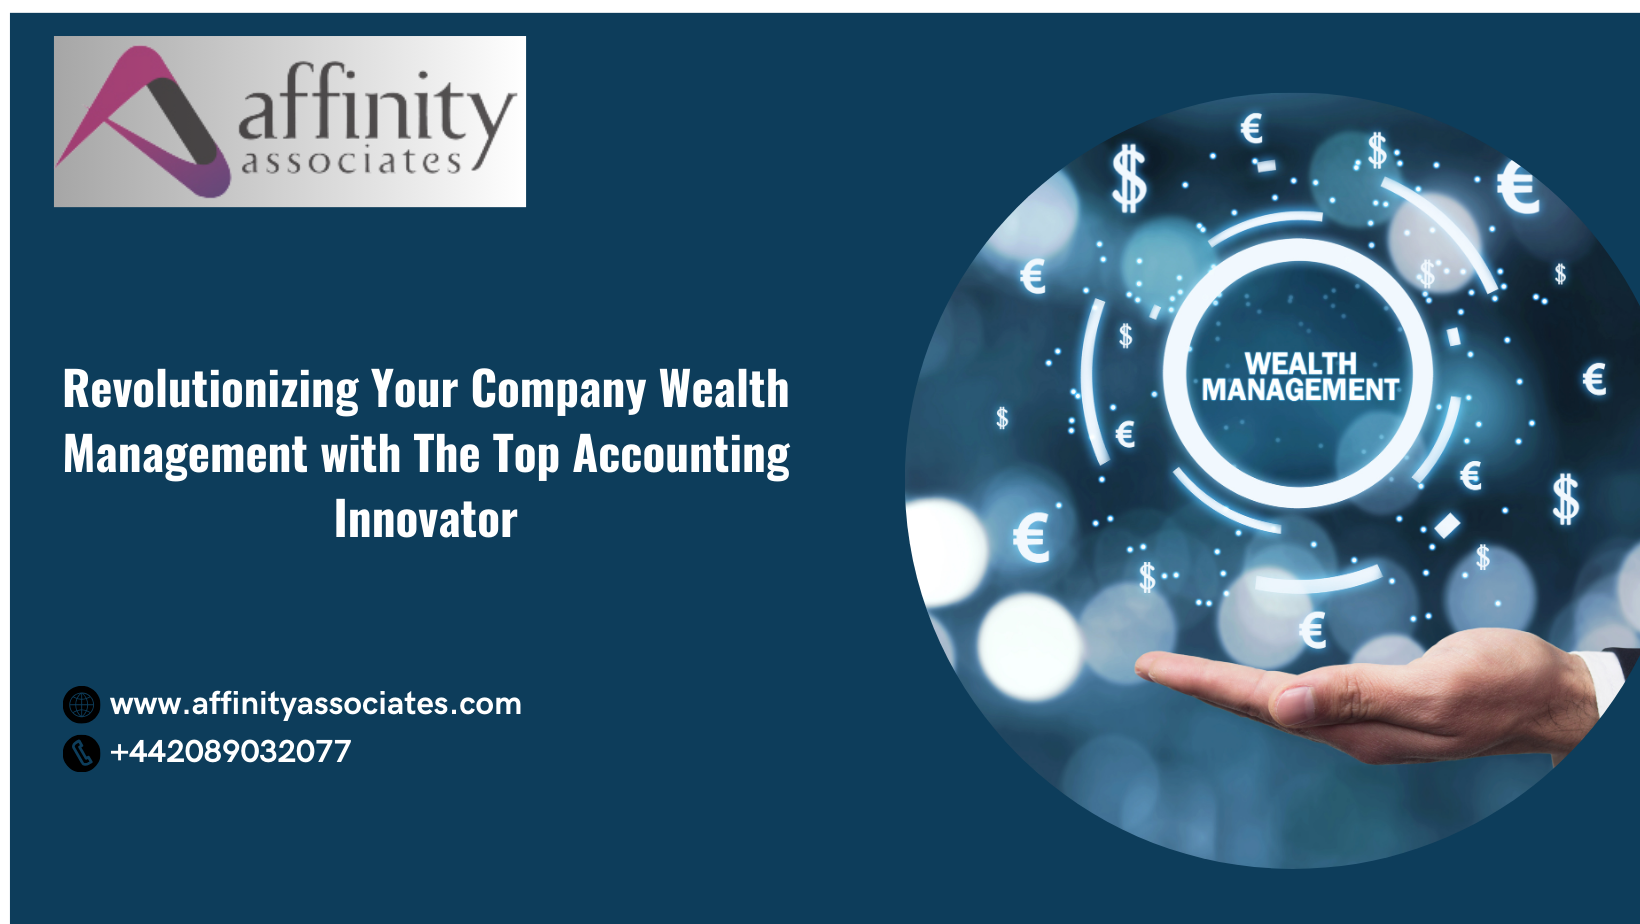 Revolutionizing Your Company Wealth Management with The Top Accounting Innovator